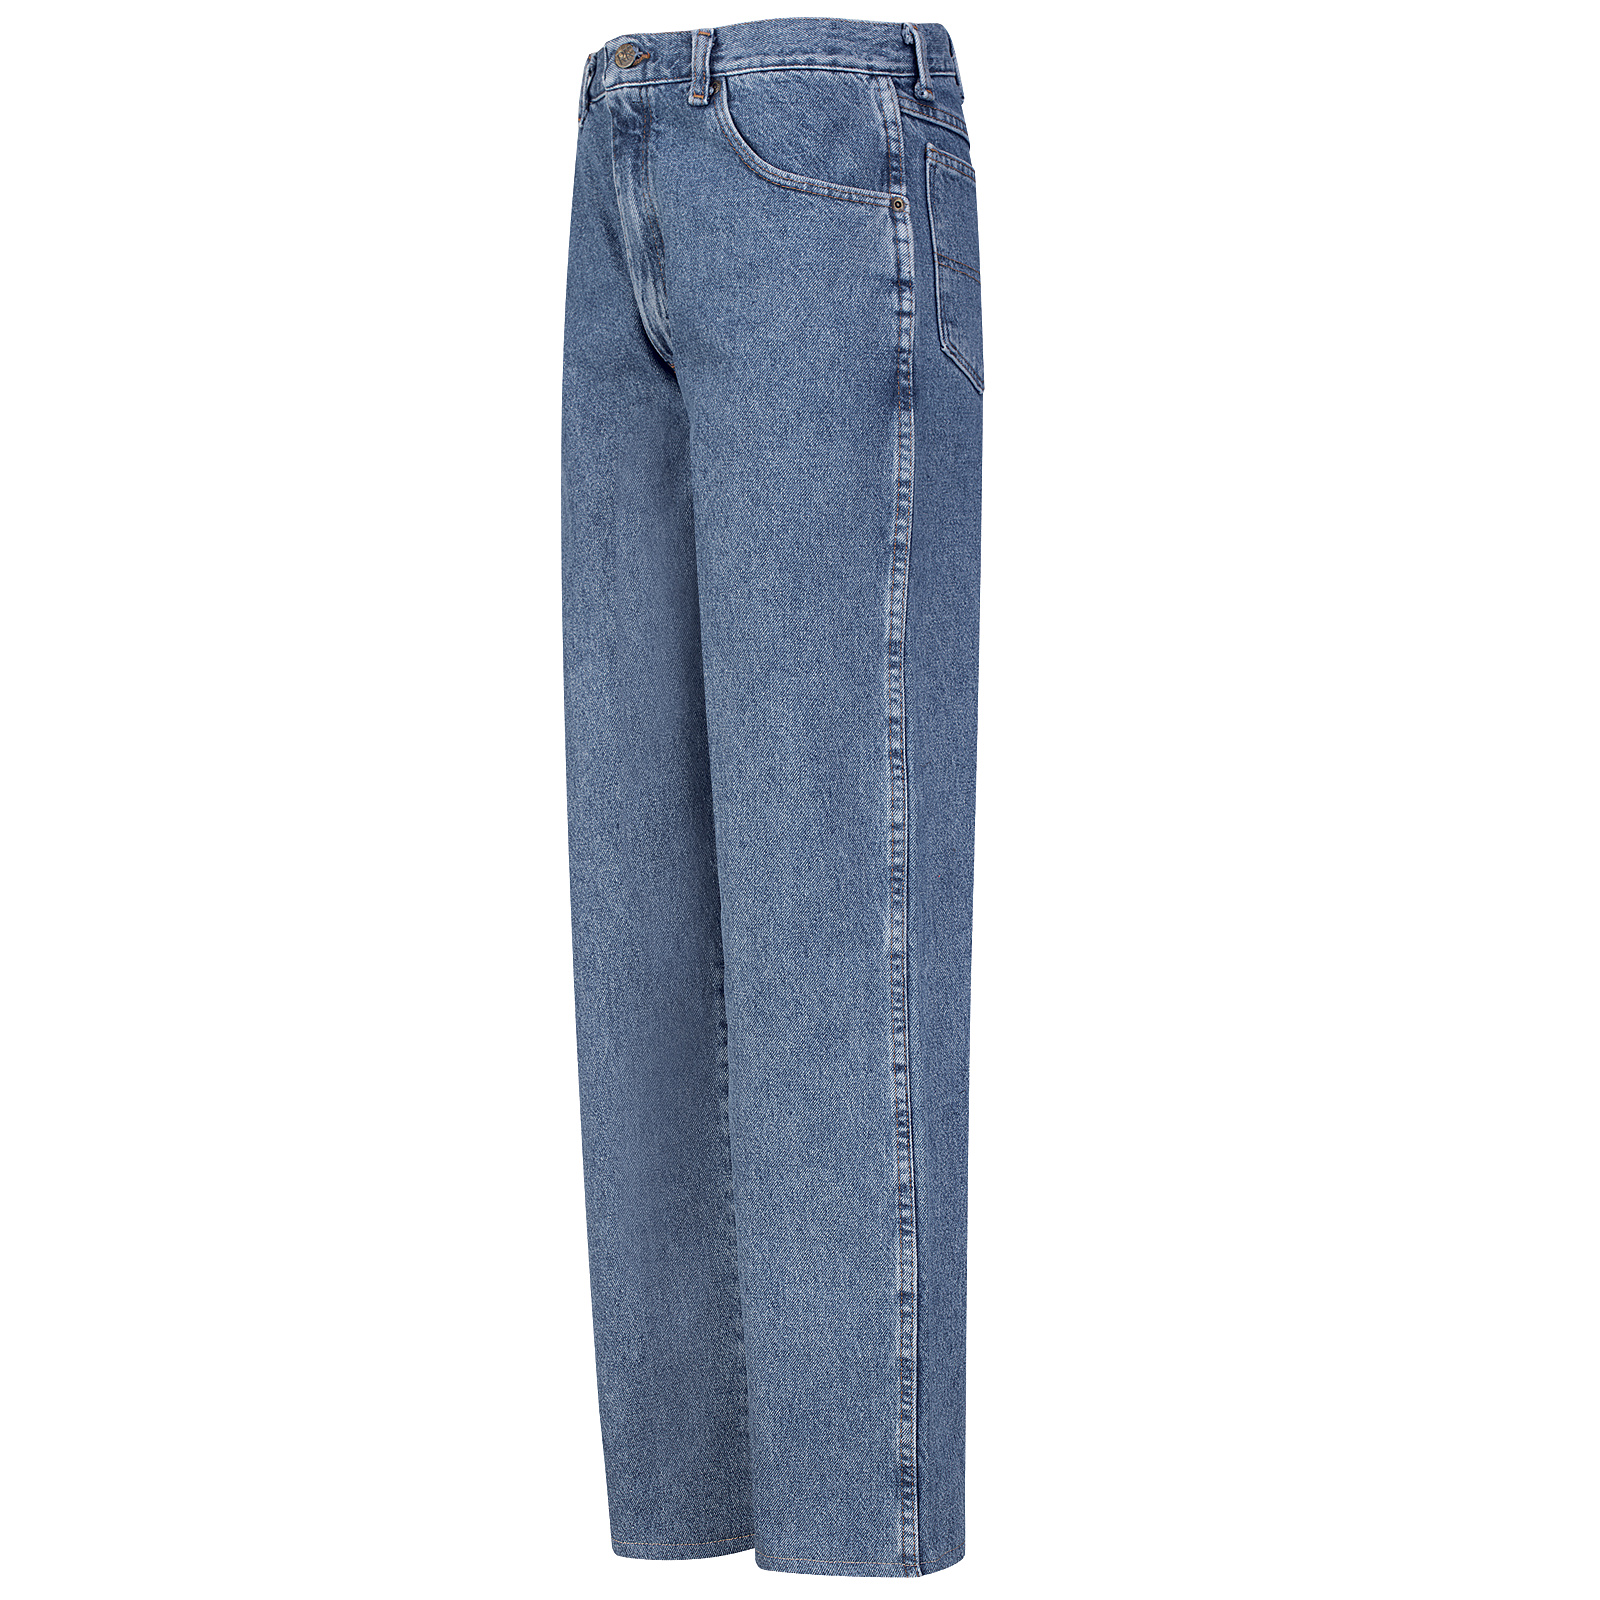 Men's Relaxed Fit Five Pocket Jeans